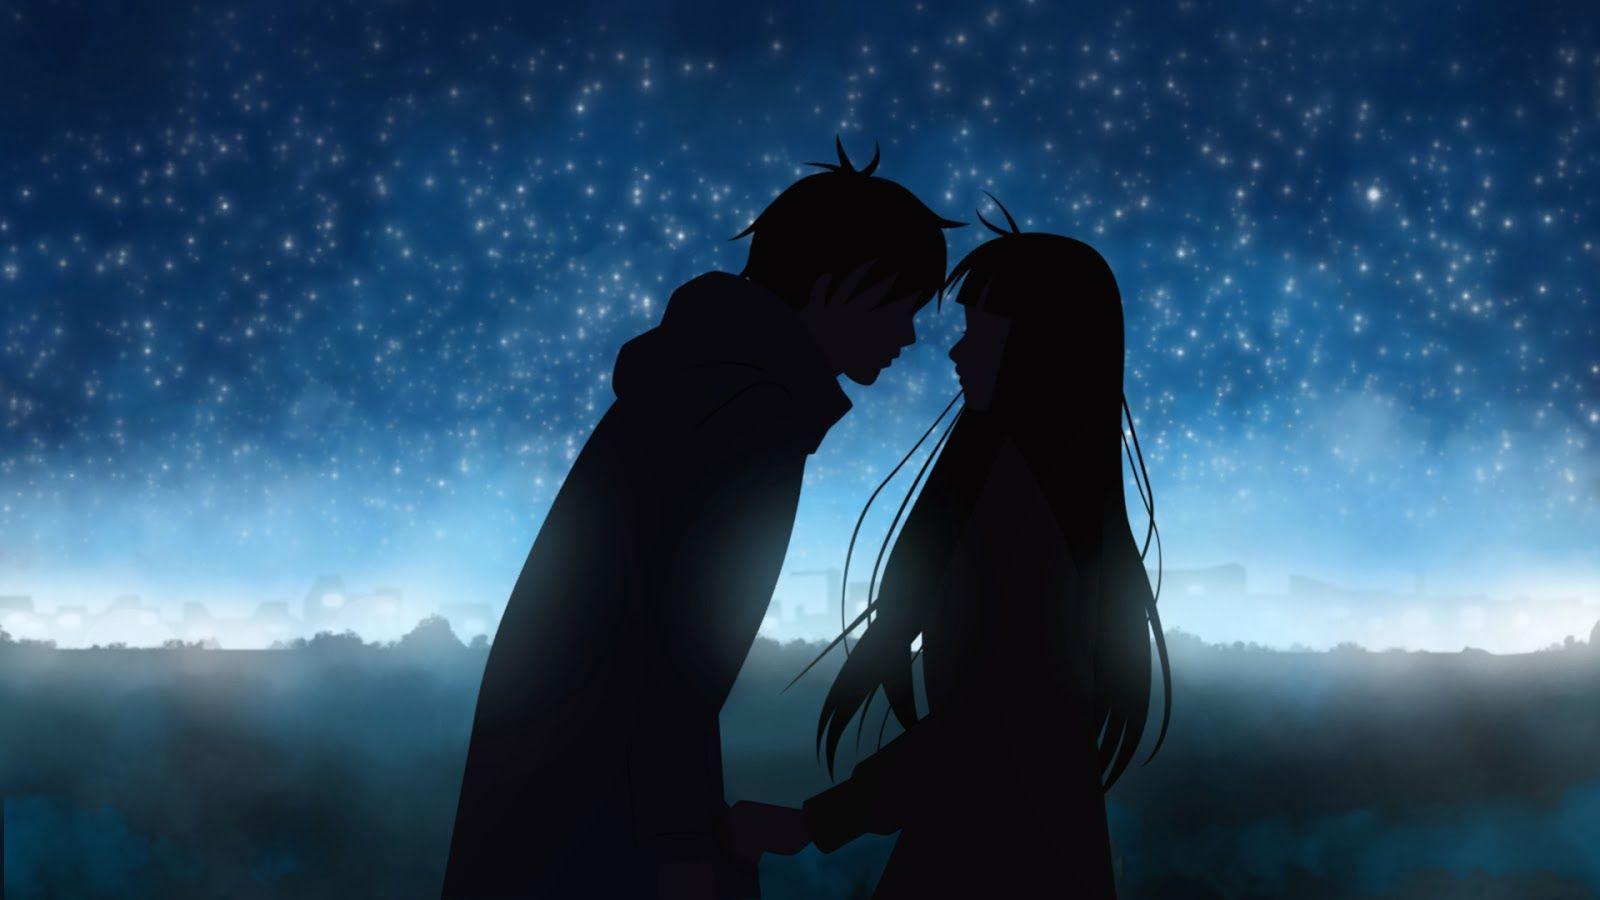 Romantic Anime Boyfriend And Girlfriend Wallpapers - Wallpaper Cave